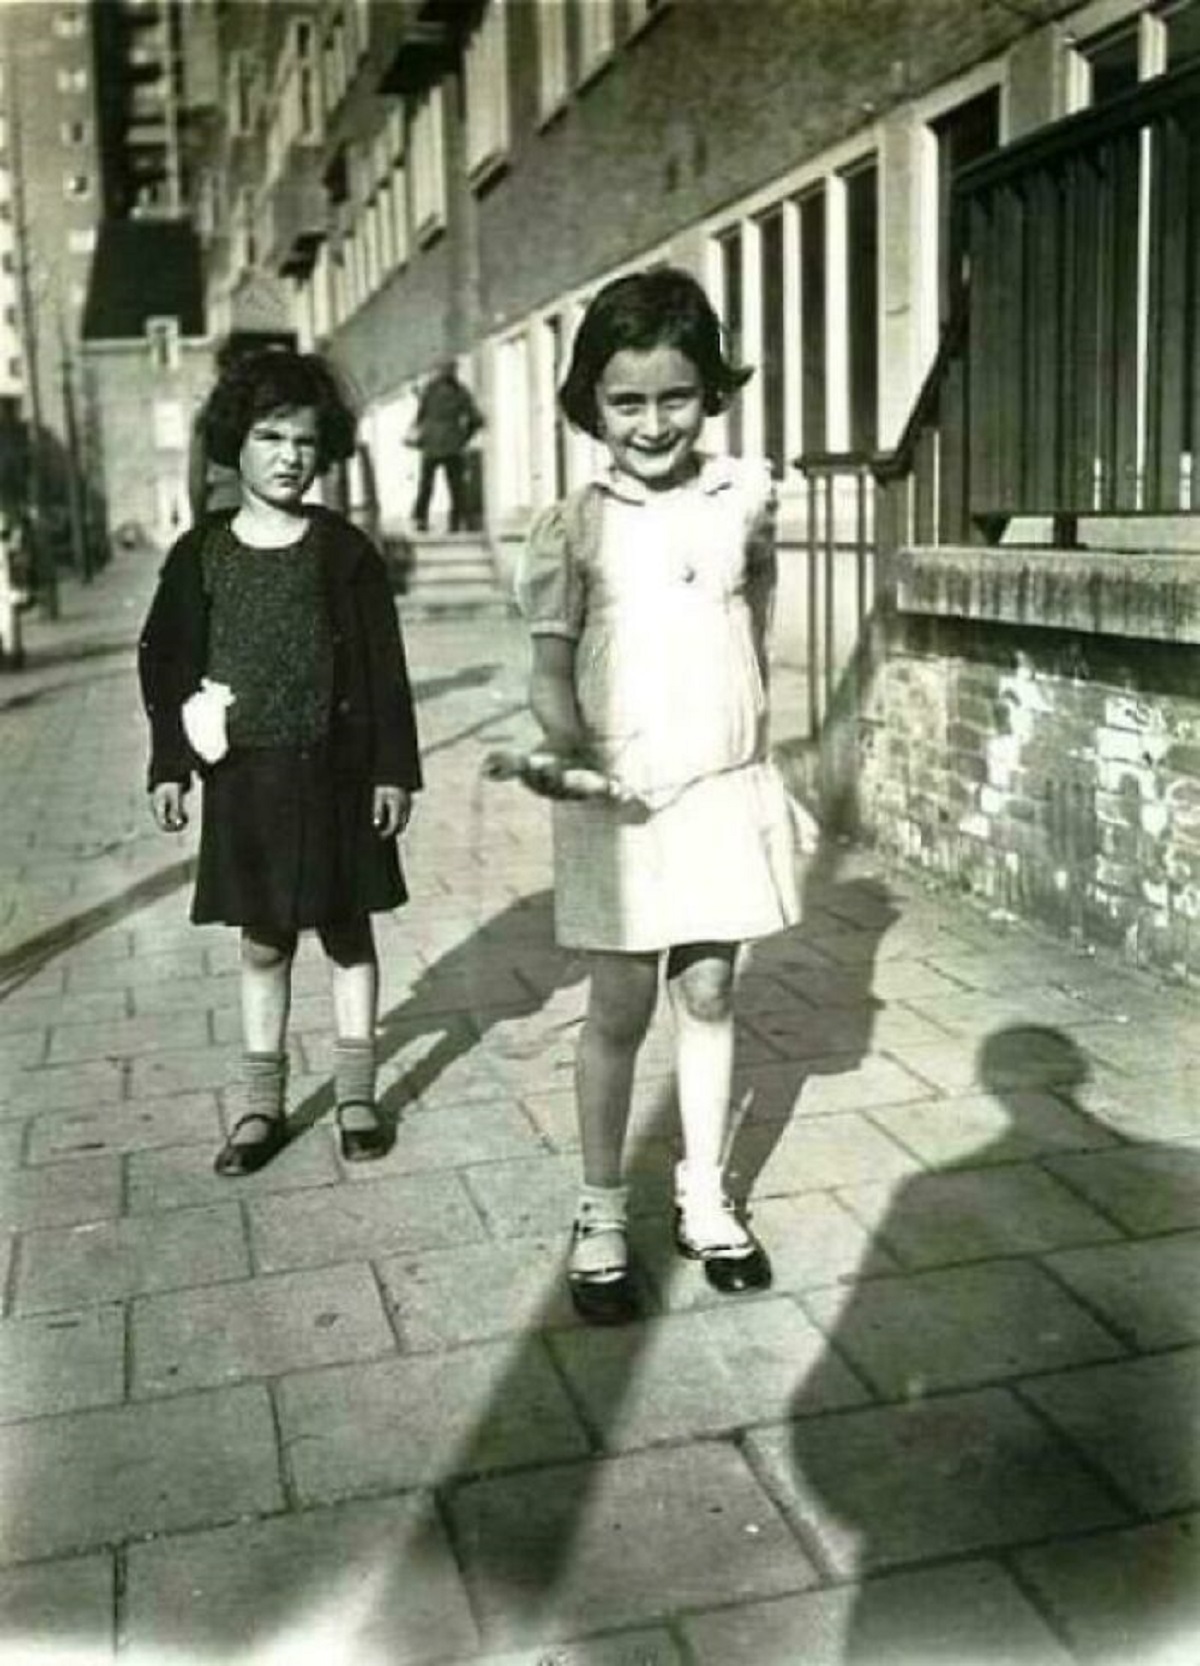 Six-Year-Old Anne Frank Holding A Jumping Rope Next To Her Friend, Sanne Ledermann, On A Pavement In Amsterdam. 1935